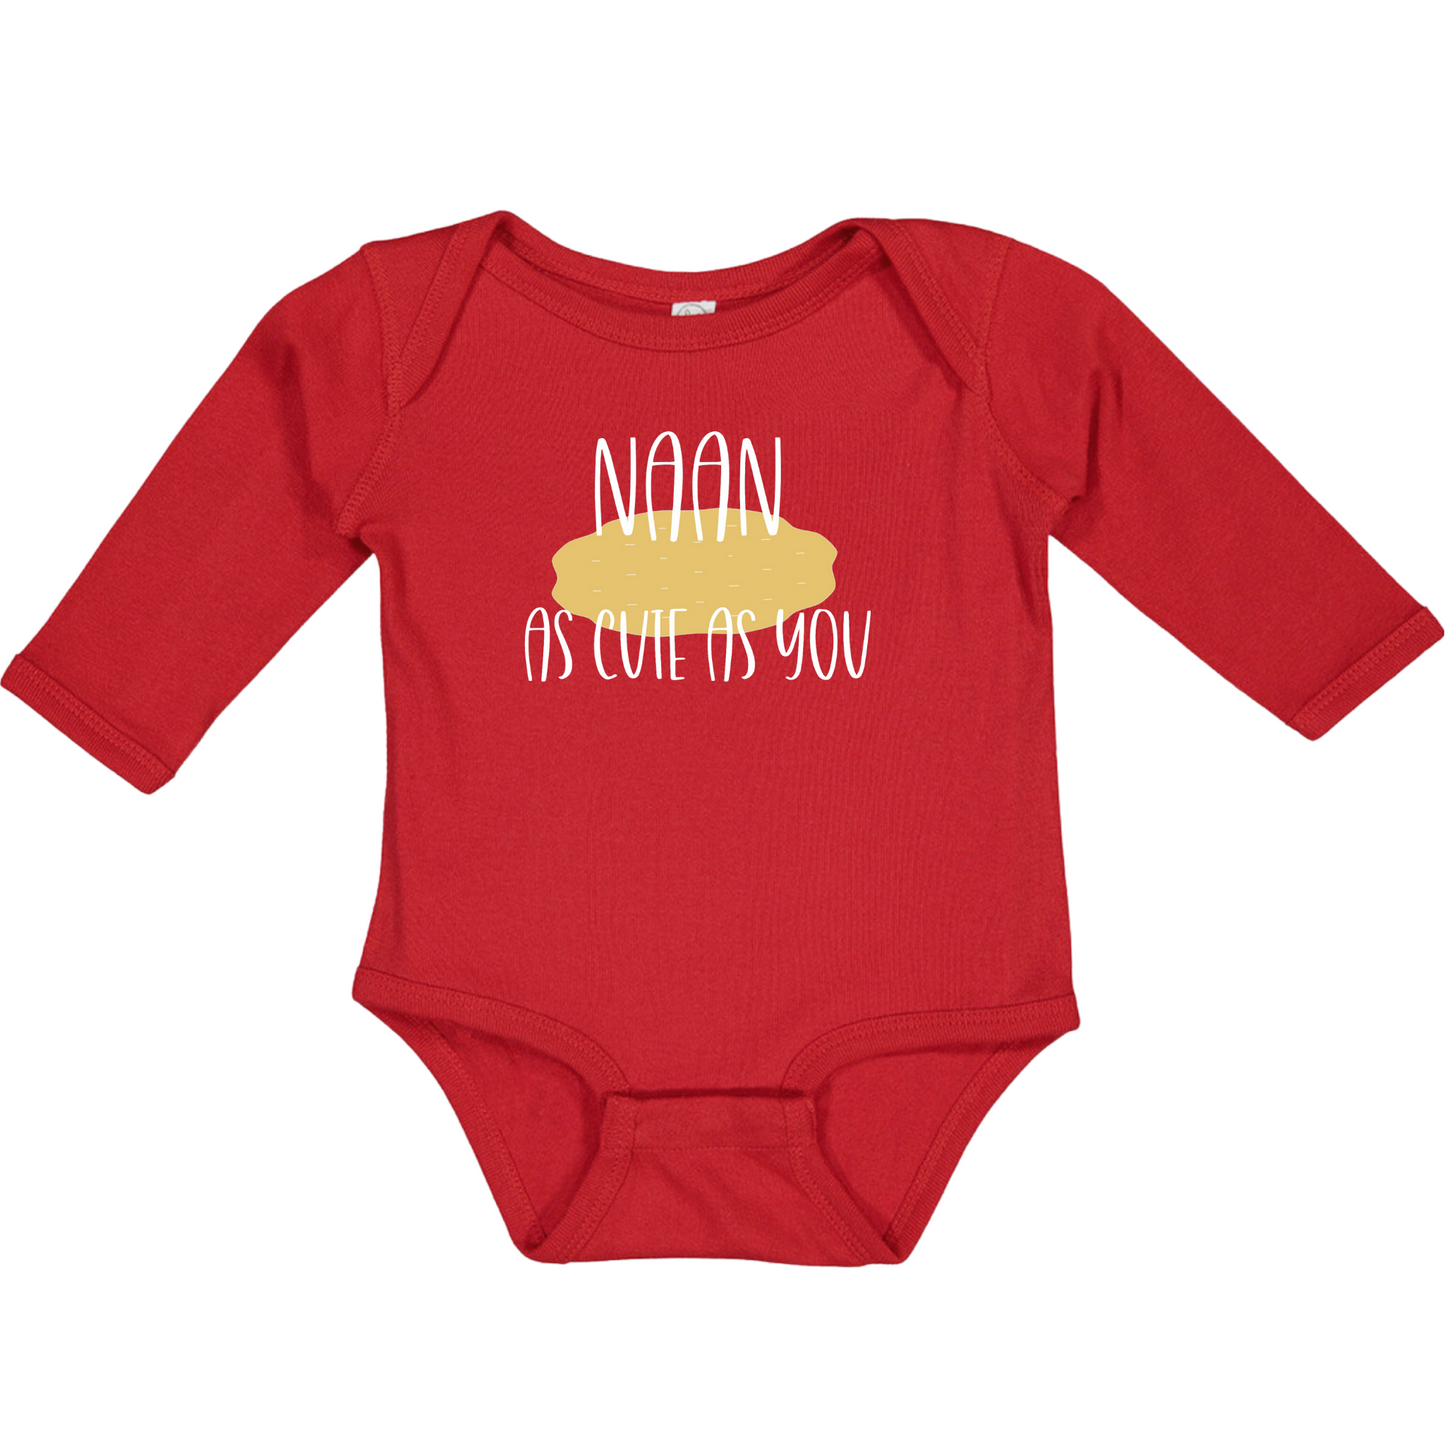 NAAN AS CUTE AS YOU  (White Font) - Long Sleeve Onesie